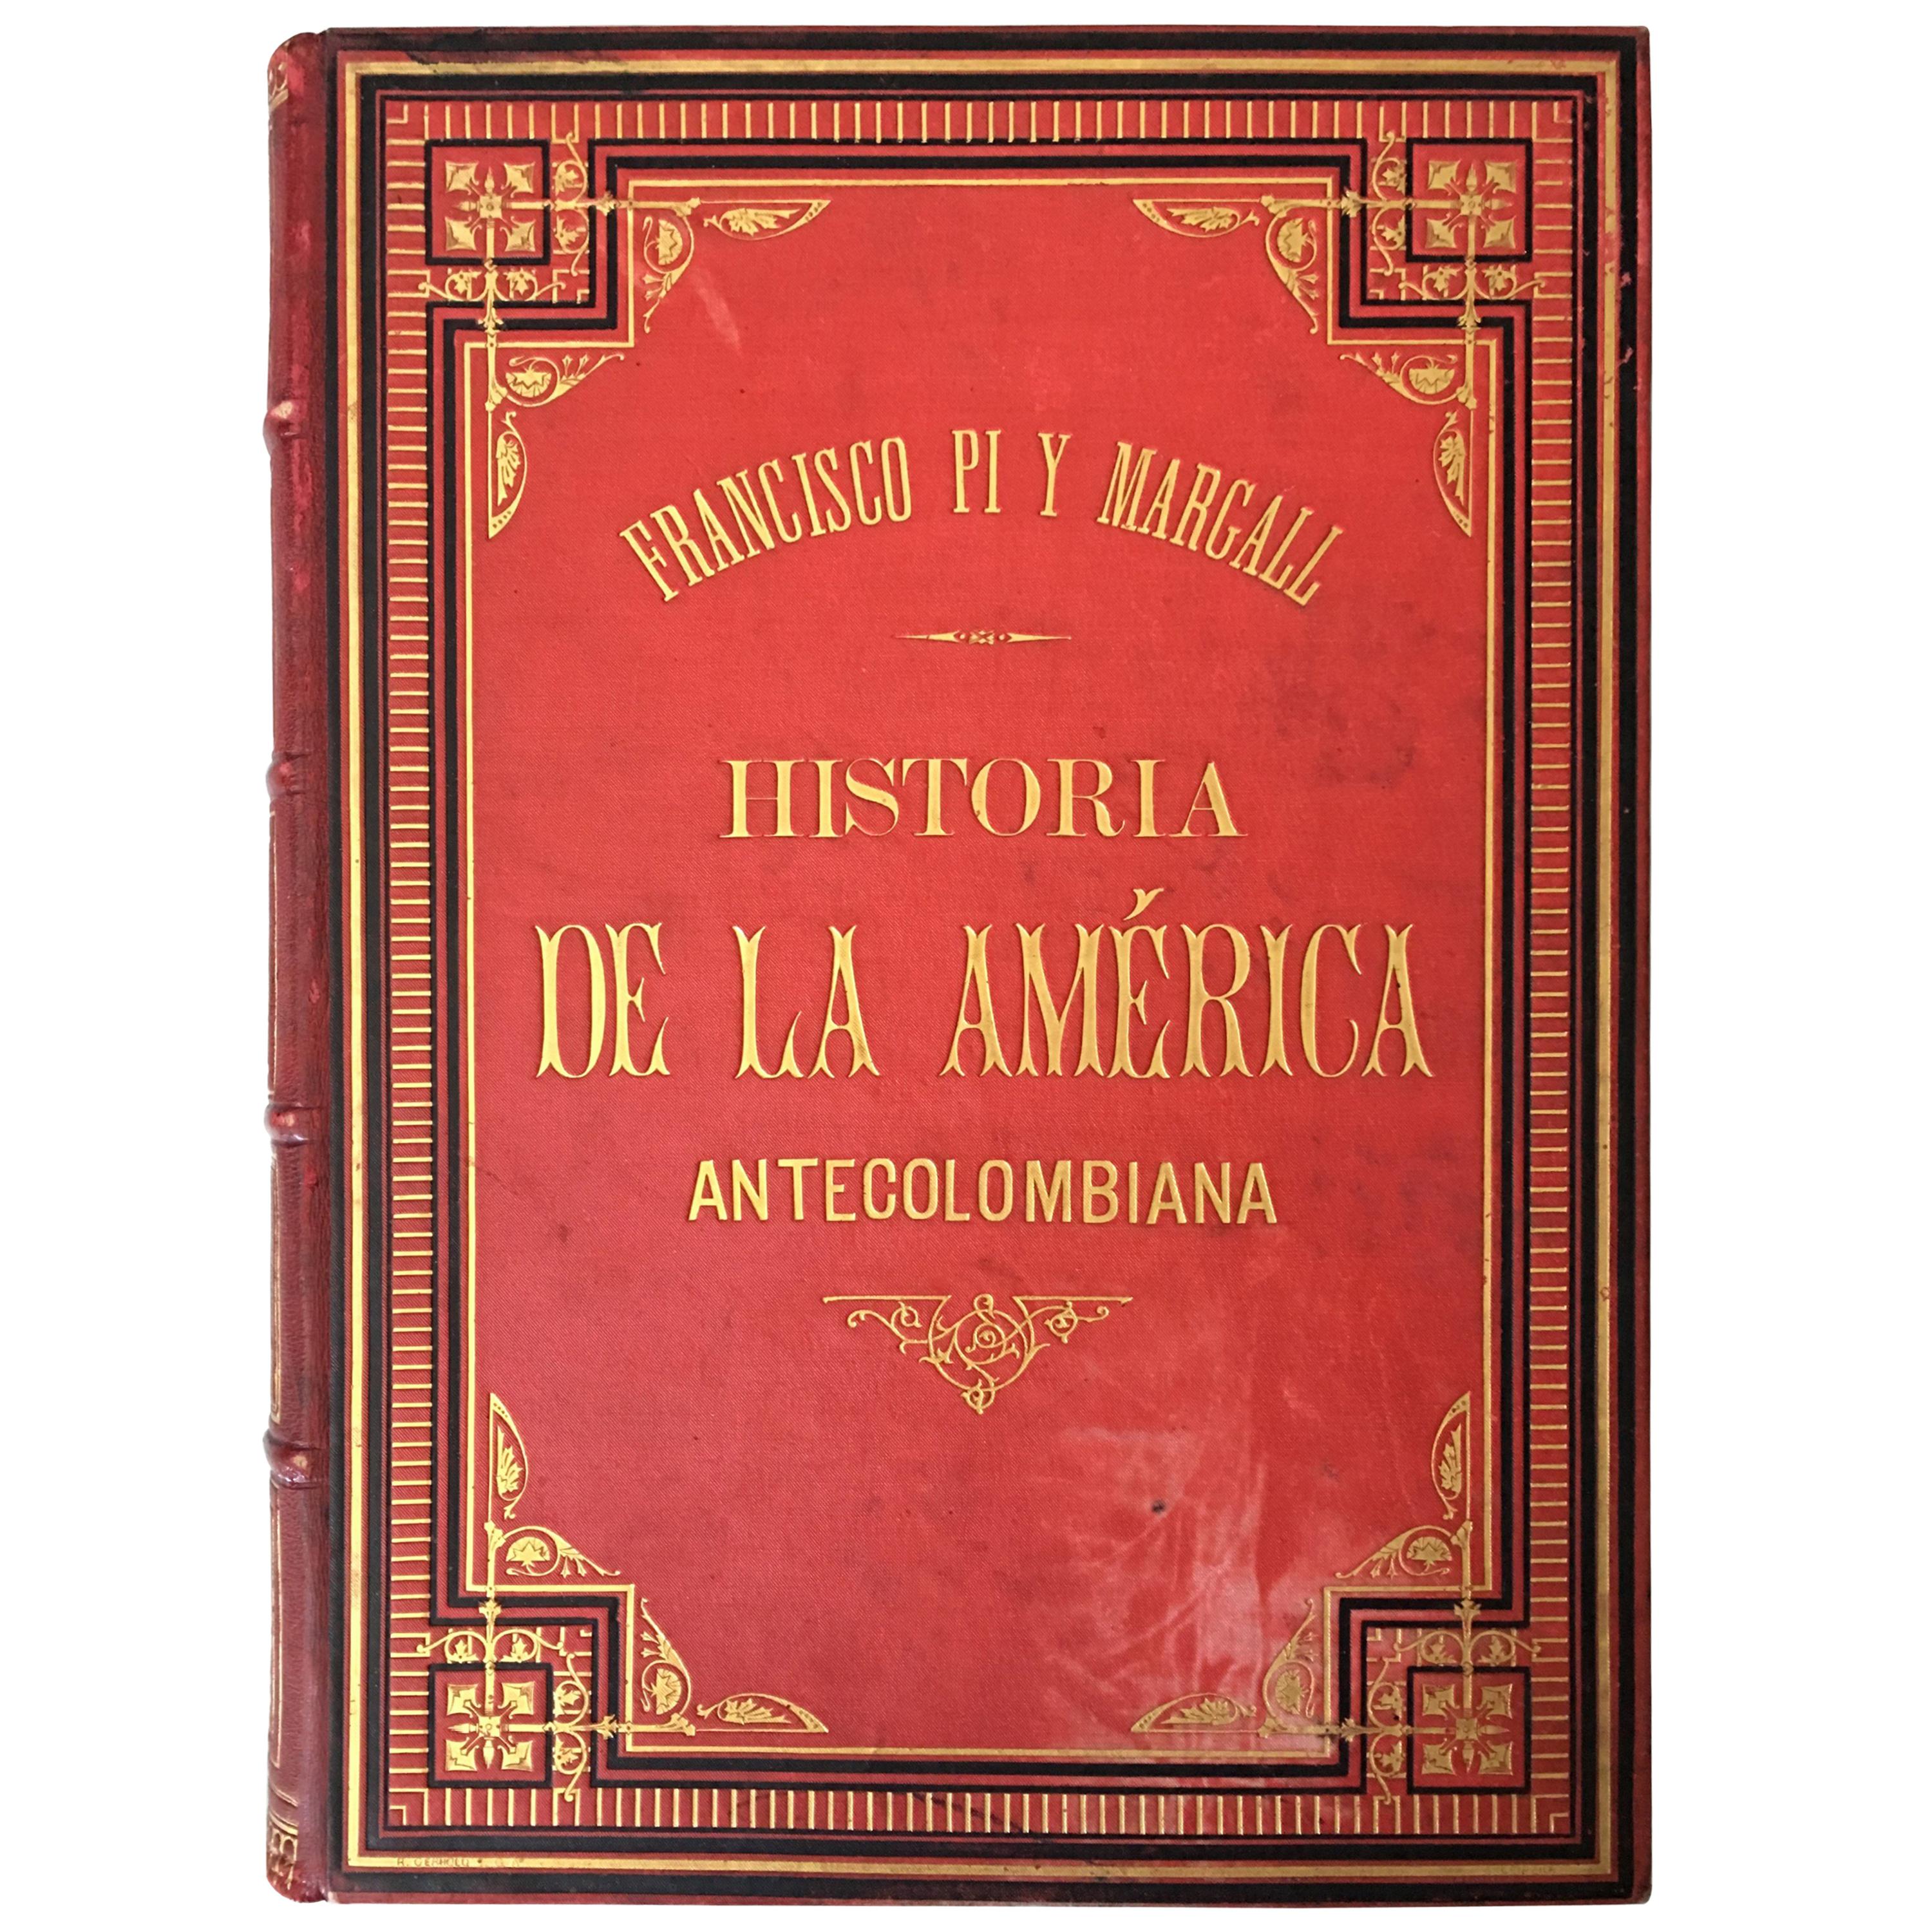 History of the Antecolombian America with Original Engravings and Pictures, 19th History of the Antecolombian America en vente